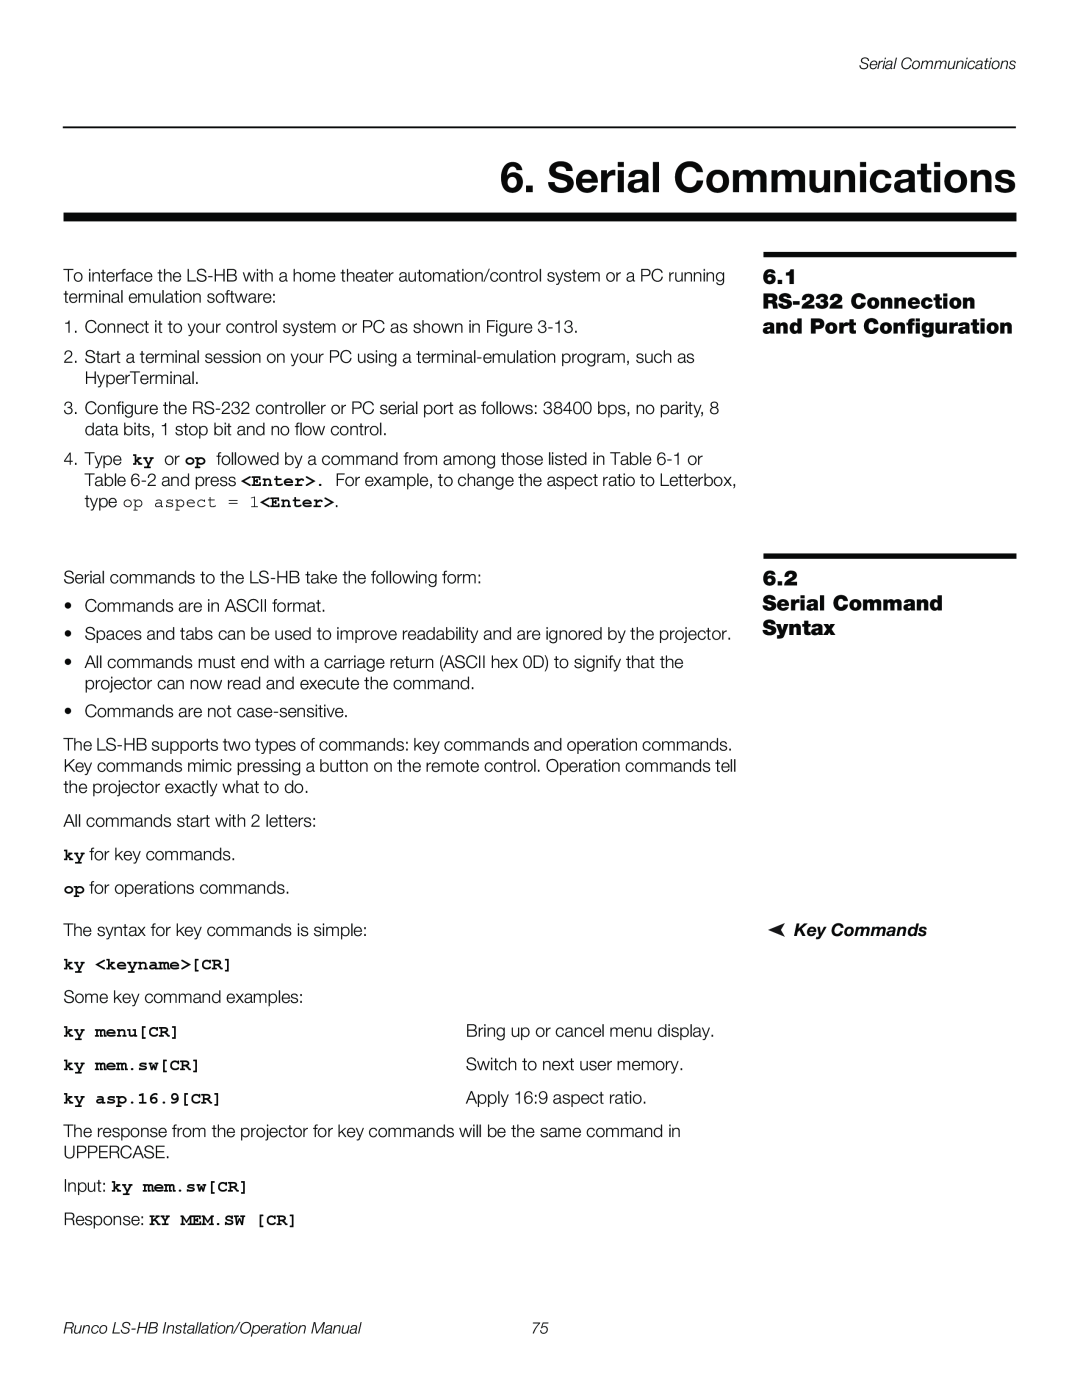 Runco LS-HB Serial Communications, 6.1 RS-232 Connection and Port Configuration 6.2, Serial Command Syntax, Key Commands 